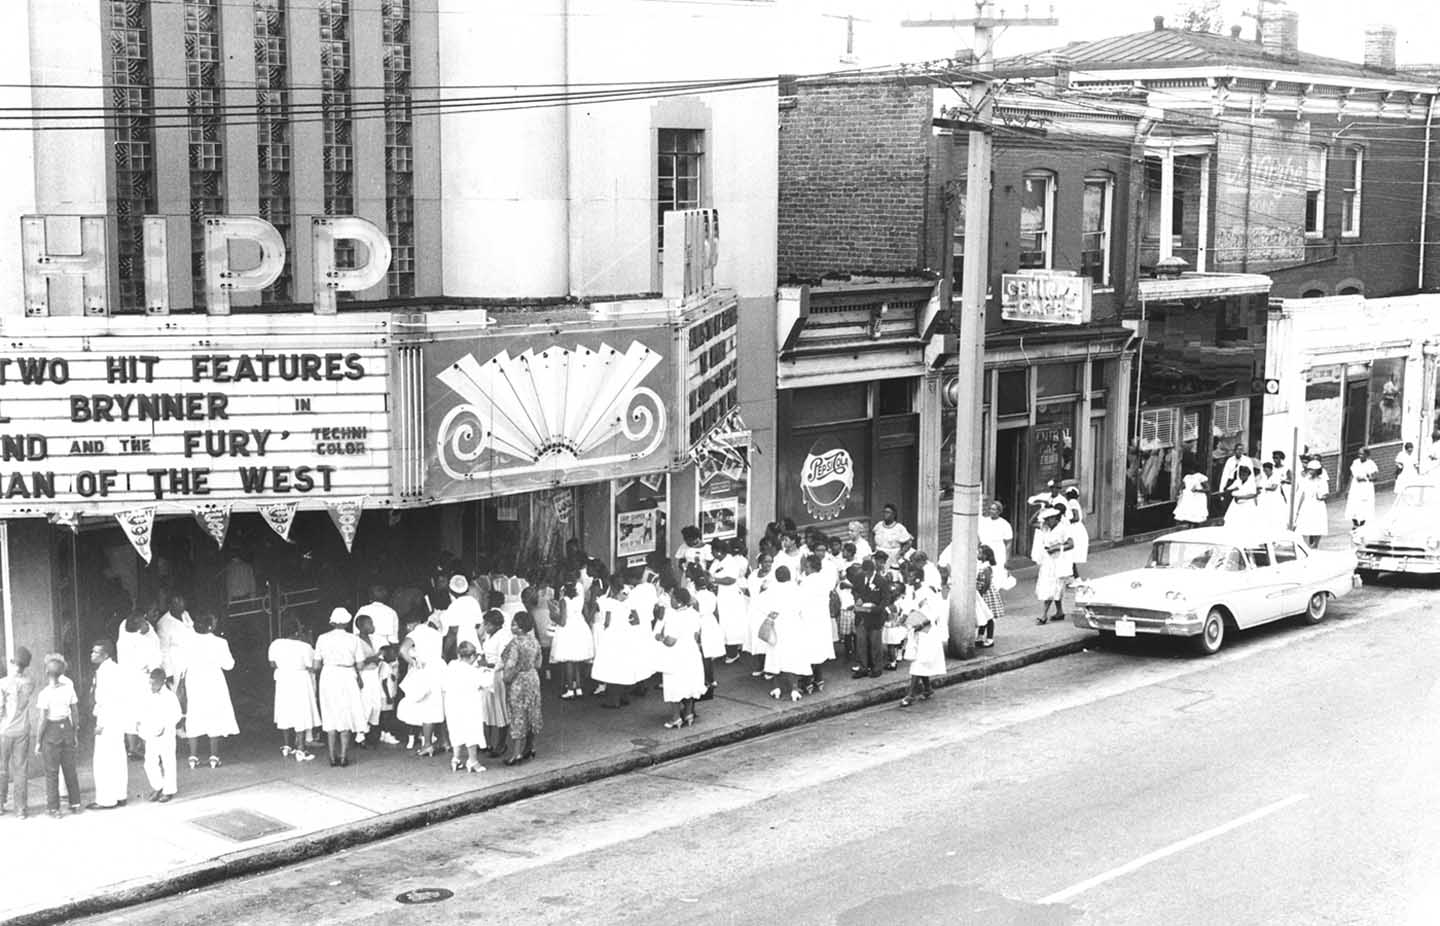 People lining up outside The Hippodrome in 1959.